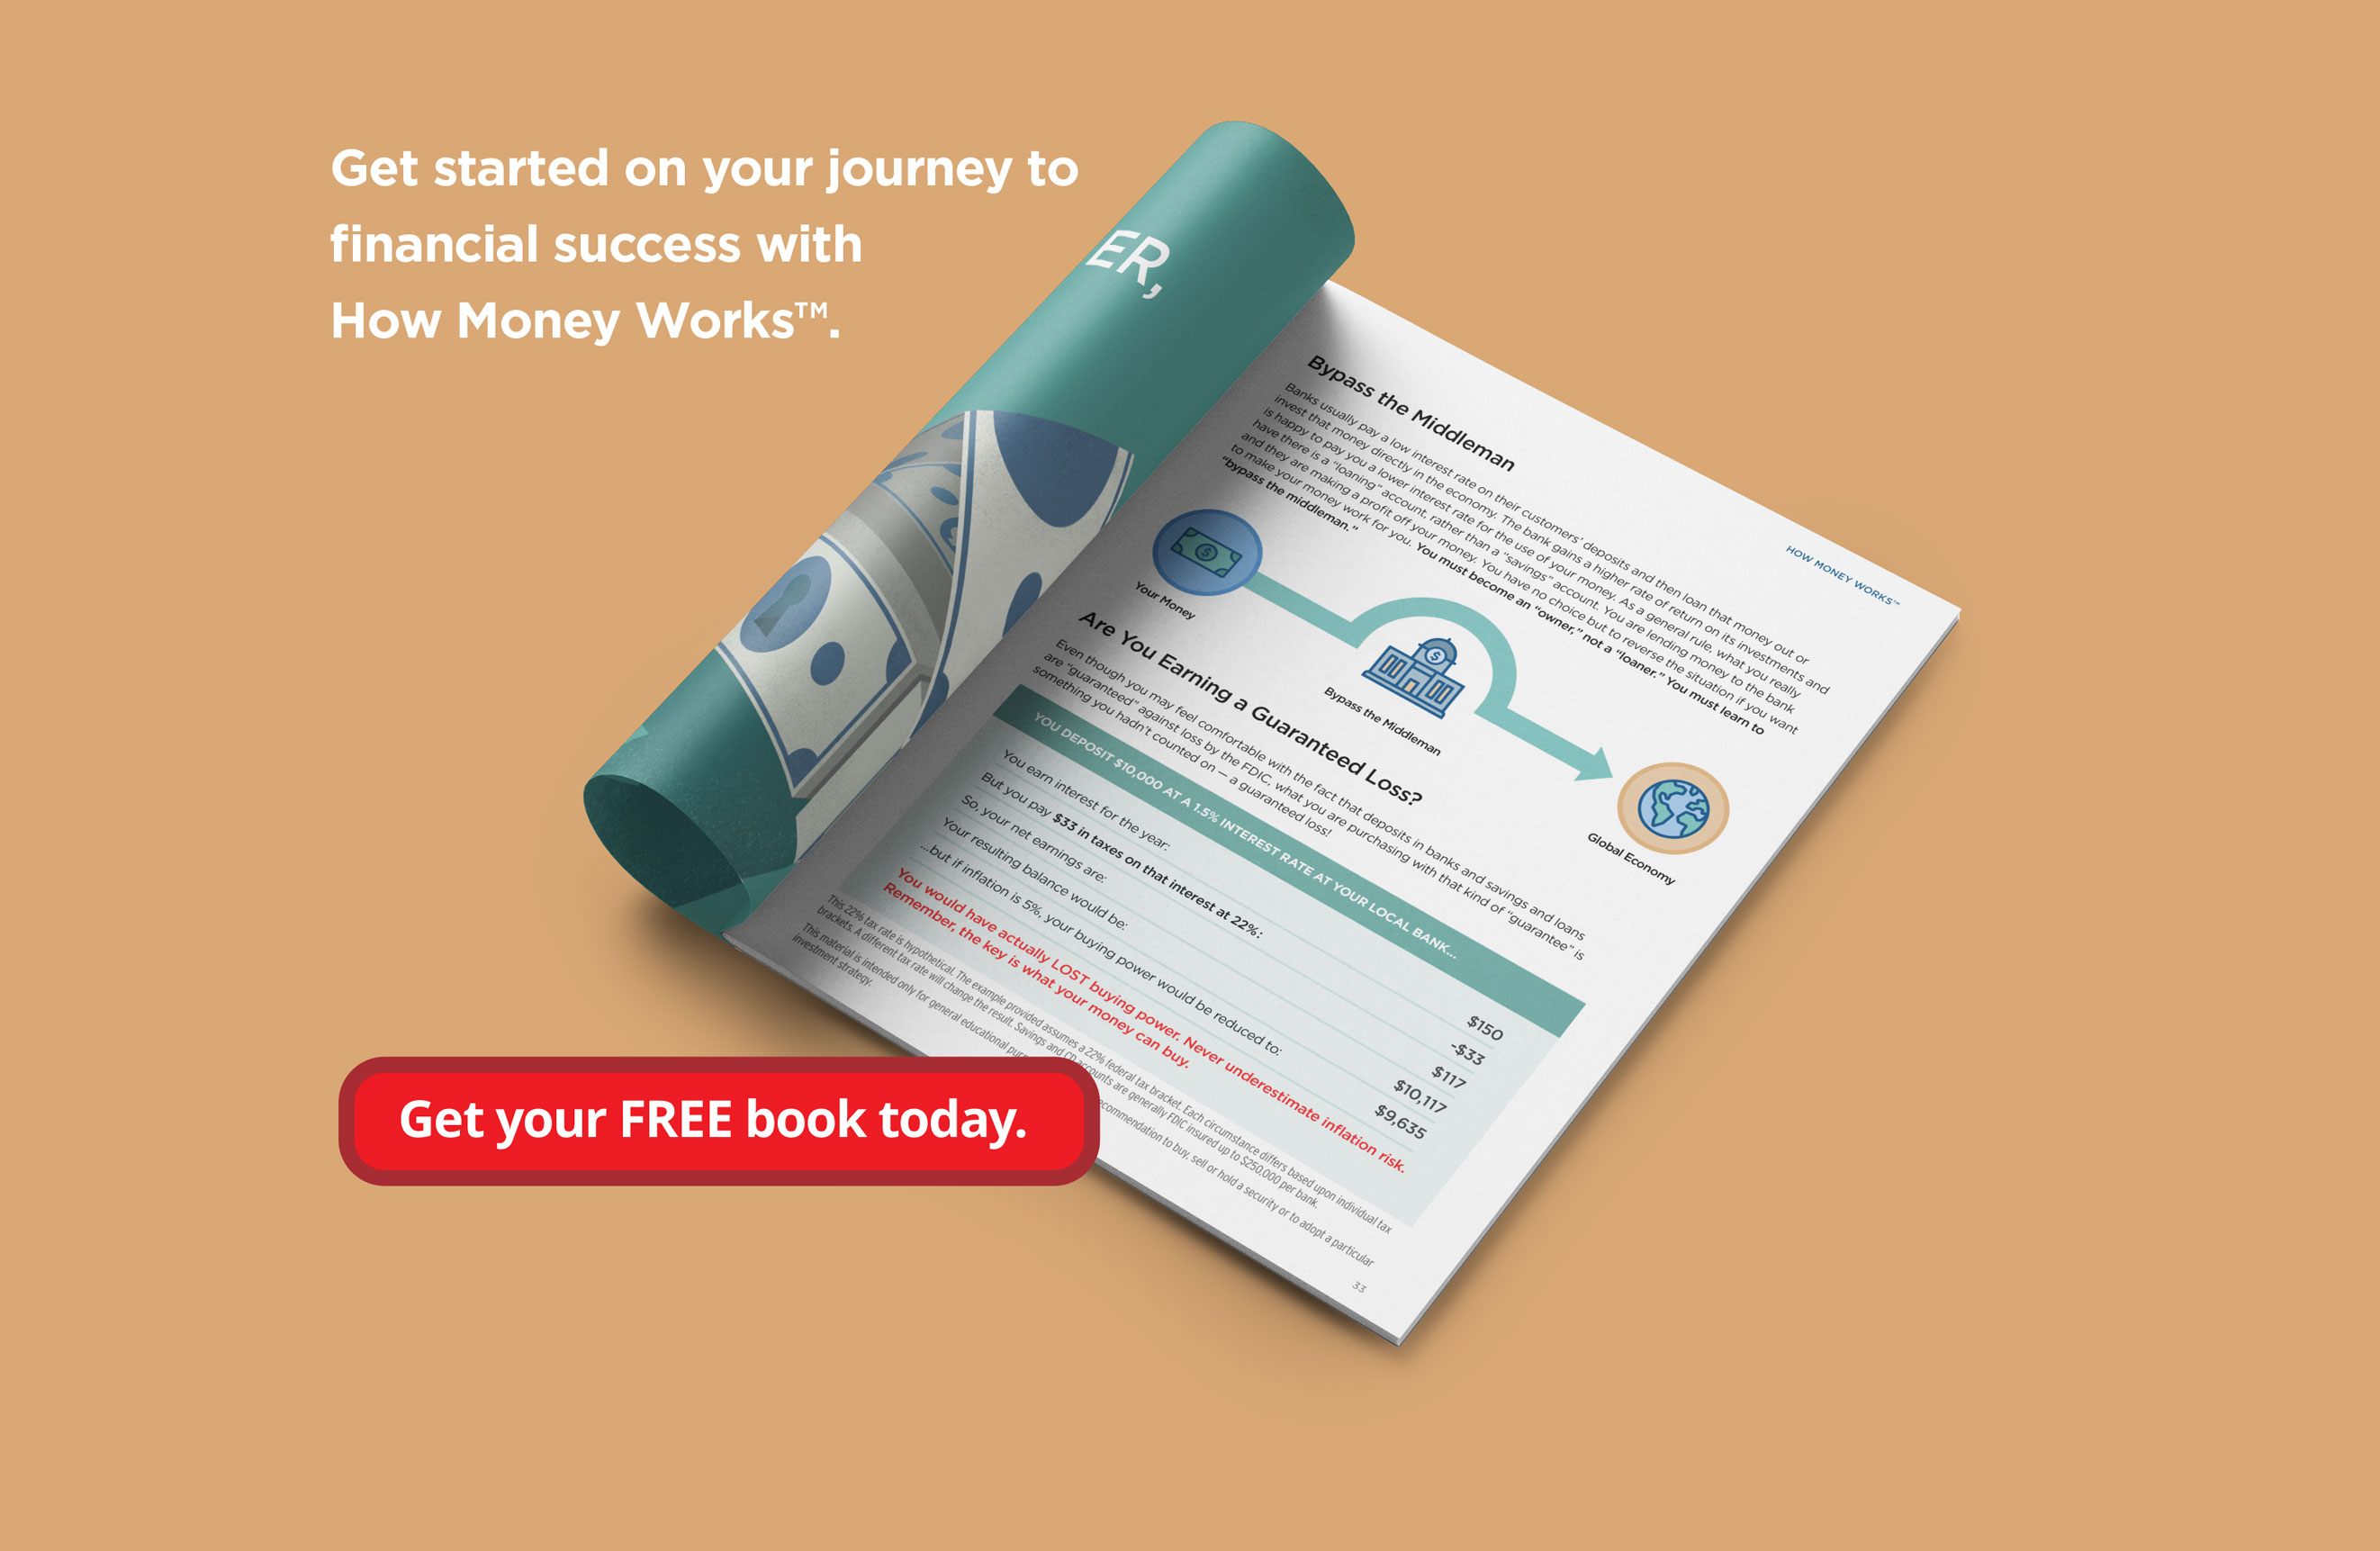 Get started on your journey to financial success with How Money Works™. Get Your FREE copy today!